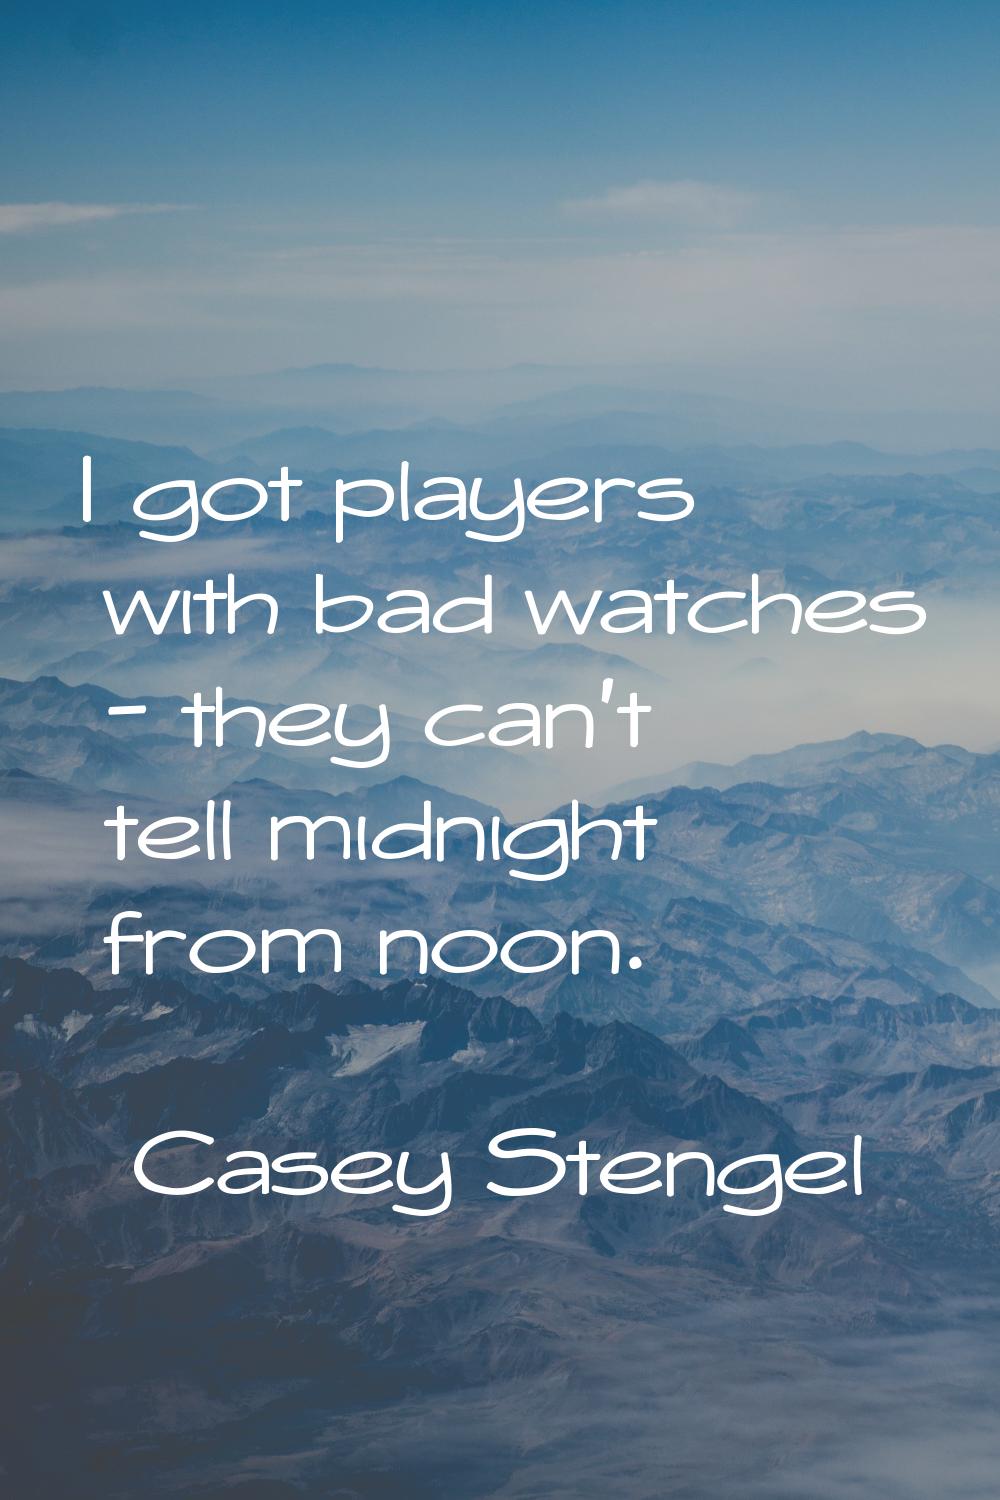 I got players with bad watches - they can't tell midnight from noon.